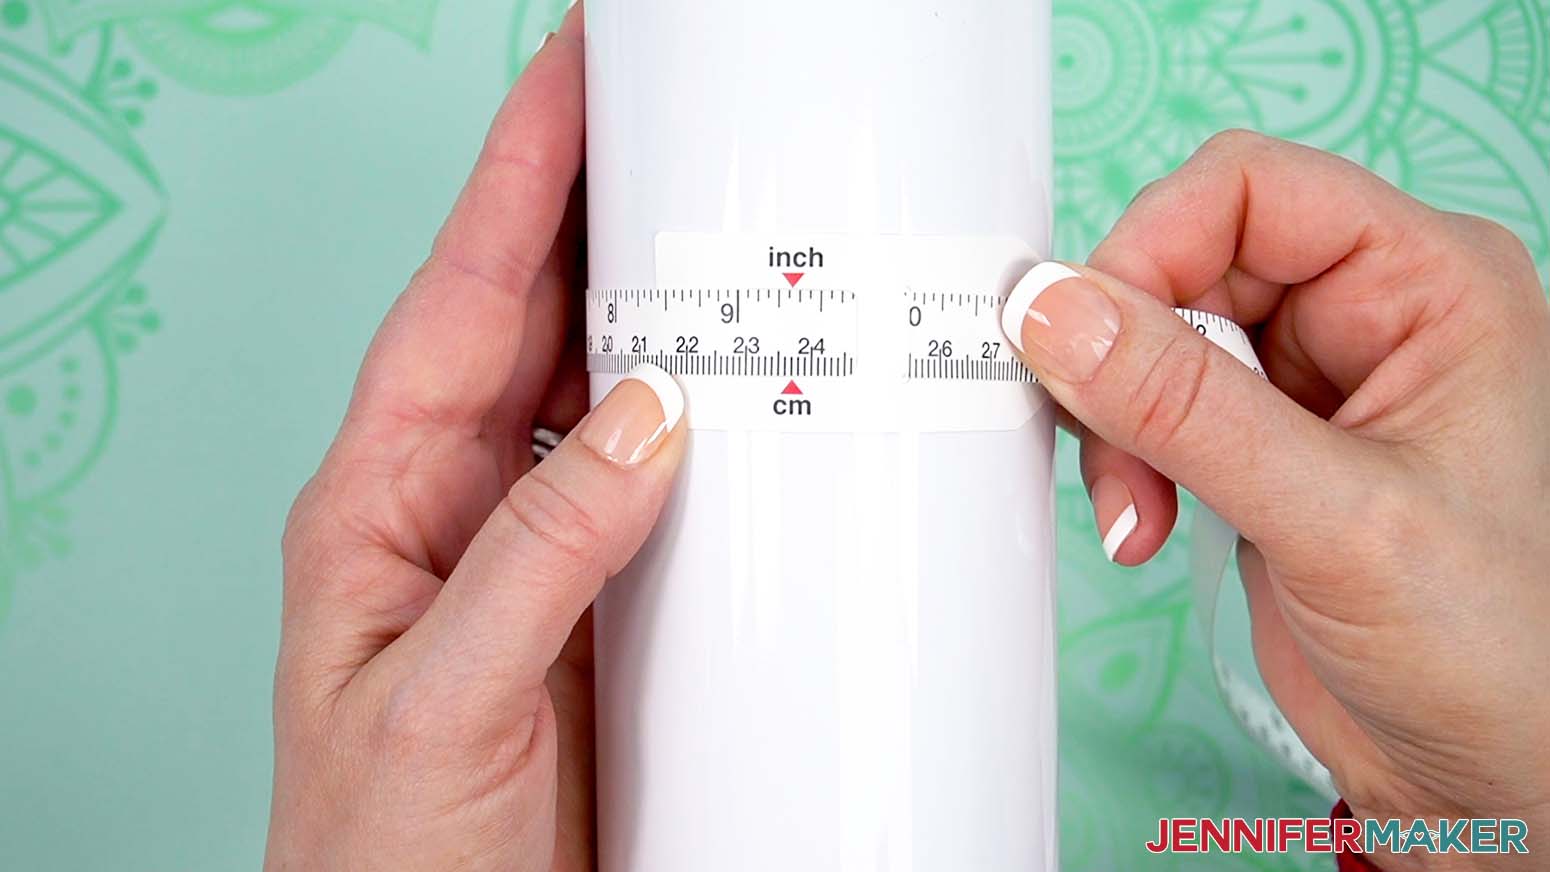 Wrap the looped tape measure tightly around the tumbler and look for the size at the arrow.